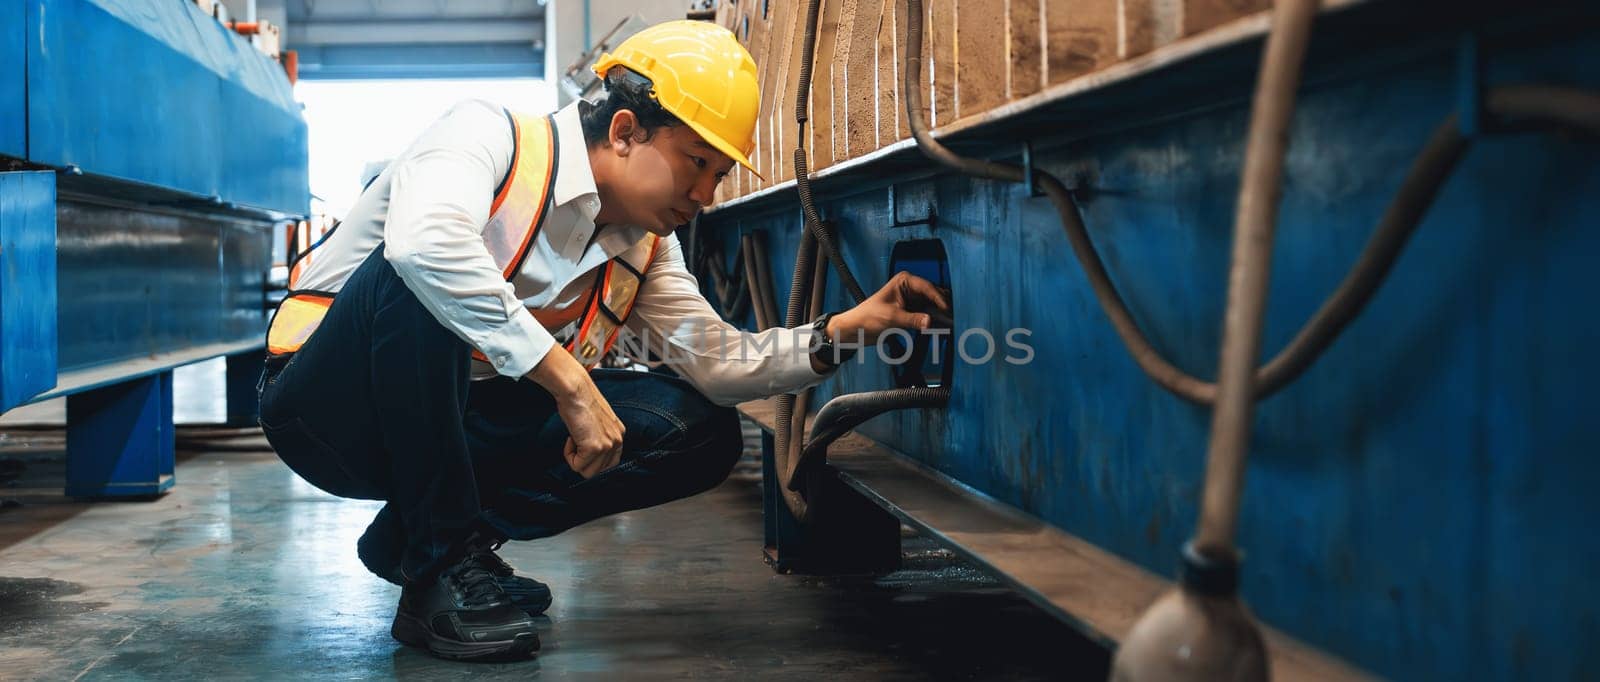 Engineer or foreman inspector conduct professional inspection on machinery assembly line. Manufacturing engineering in factory concept with machinery safety and quality control. Panorama Exemplifying